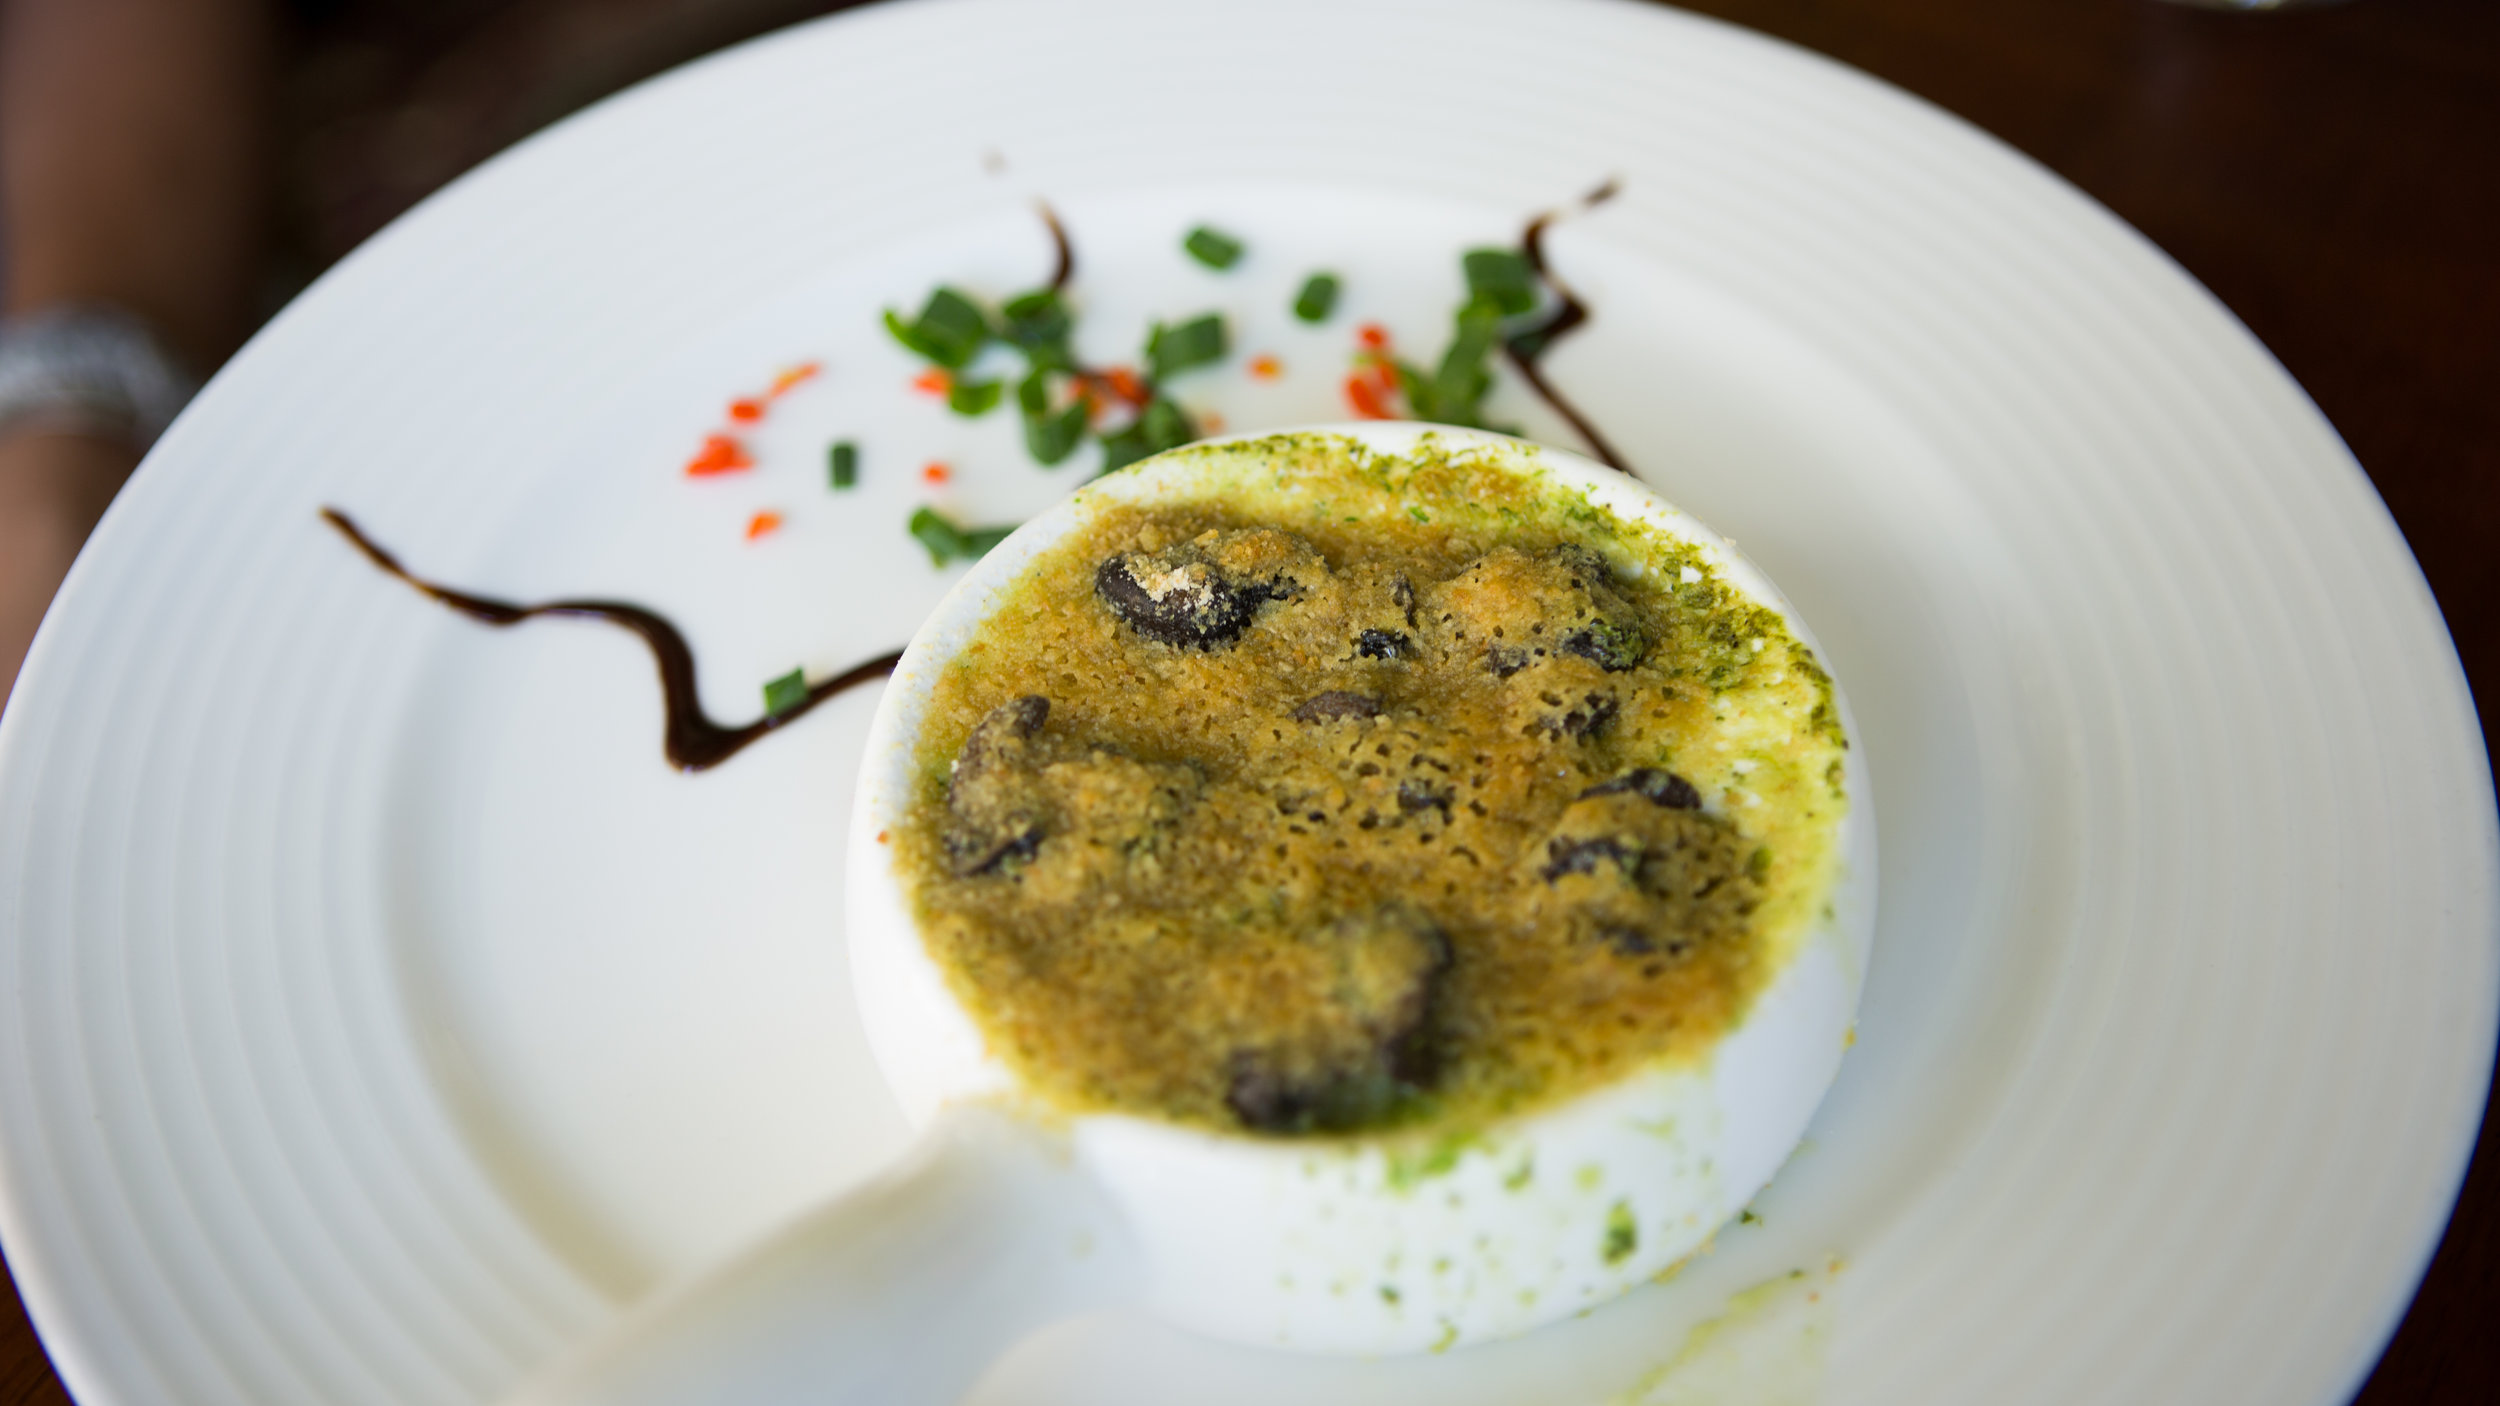 Escargot with parmesan and olive oil at La Fringale.